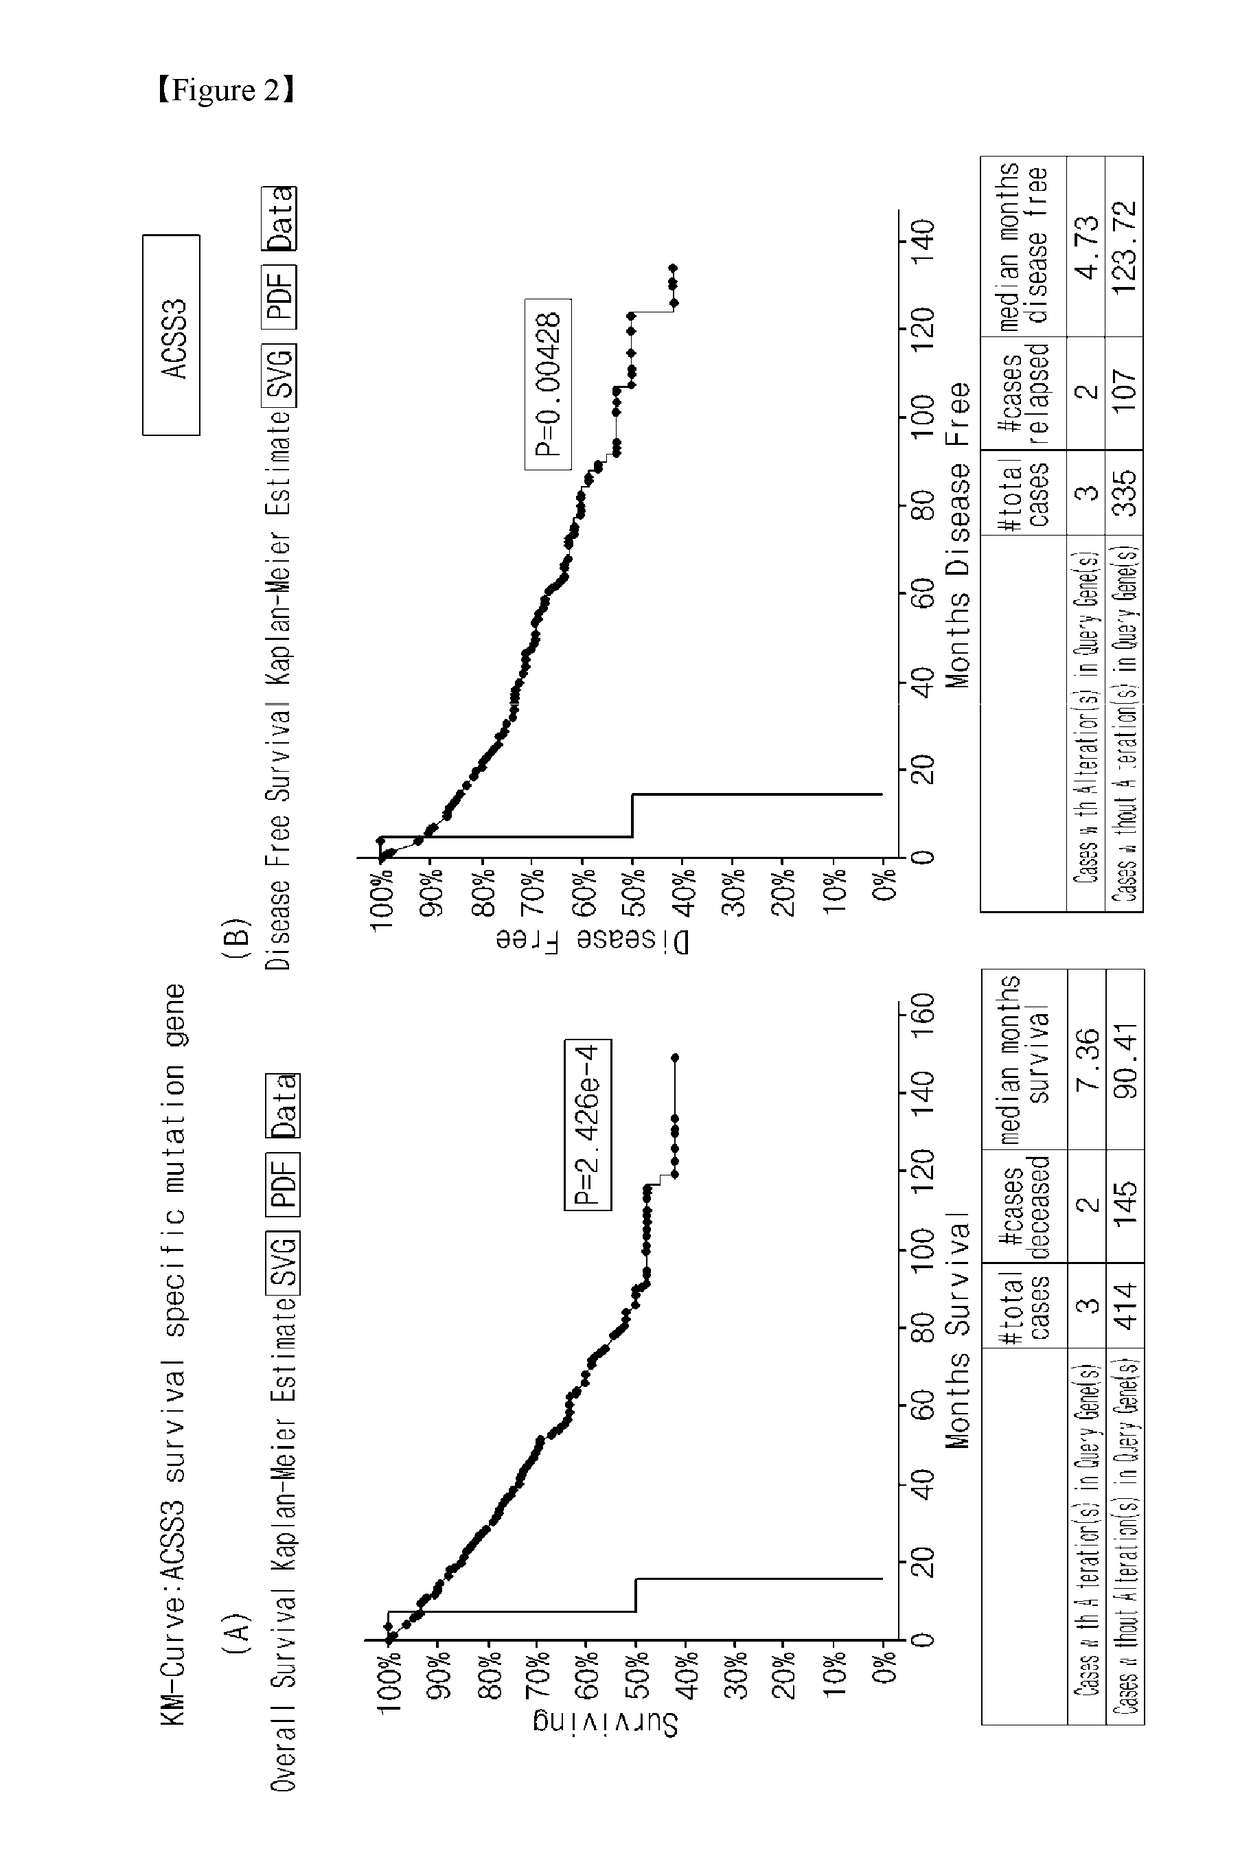 Gender-specific markers for diagnosing prognosis and determining treatment strategy for renal cancer patients